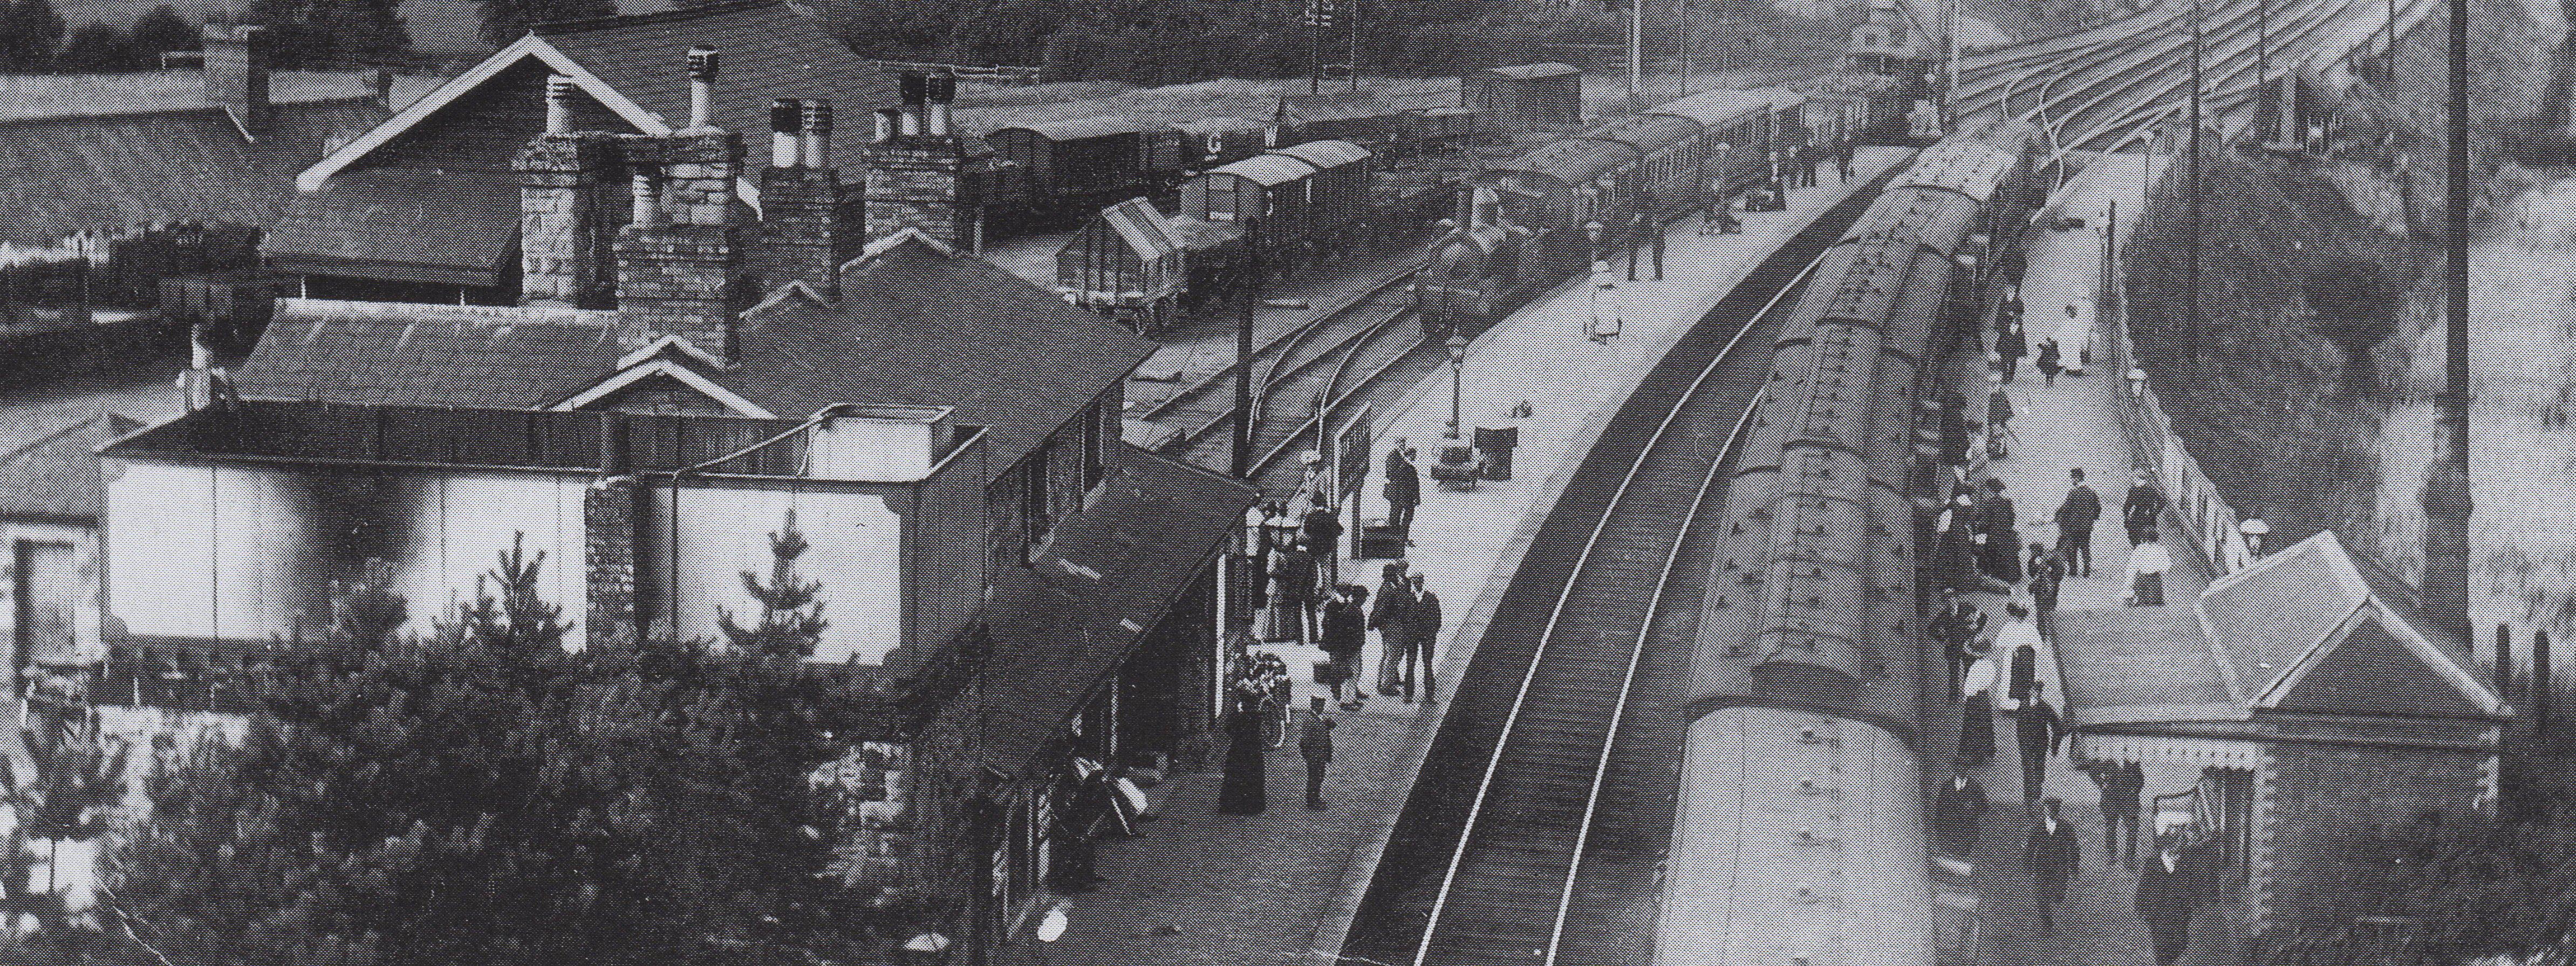 Pontrilas Station at the turn of the 20th Century